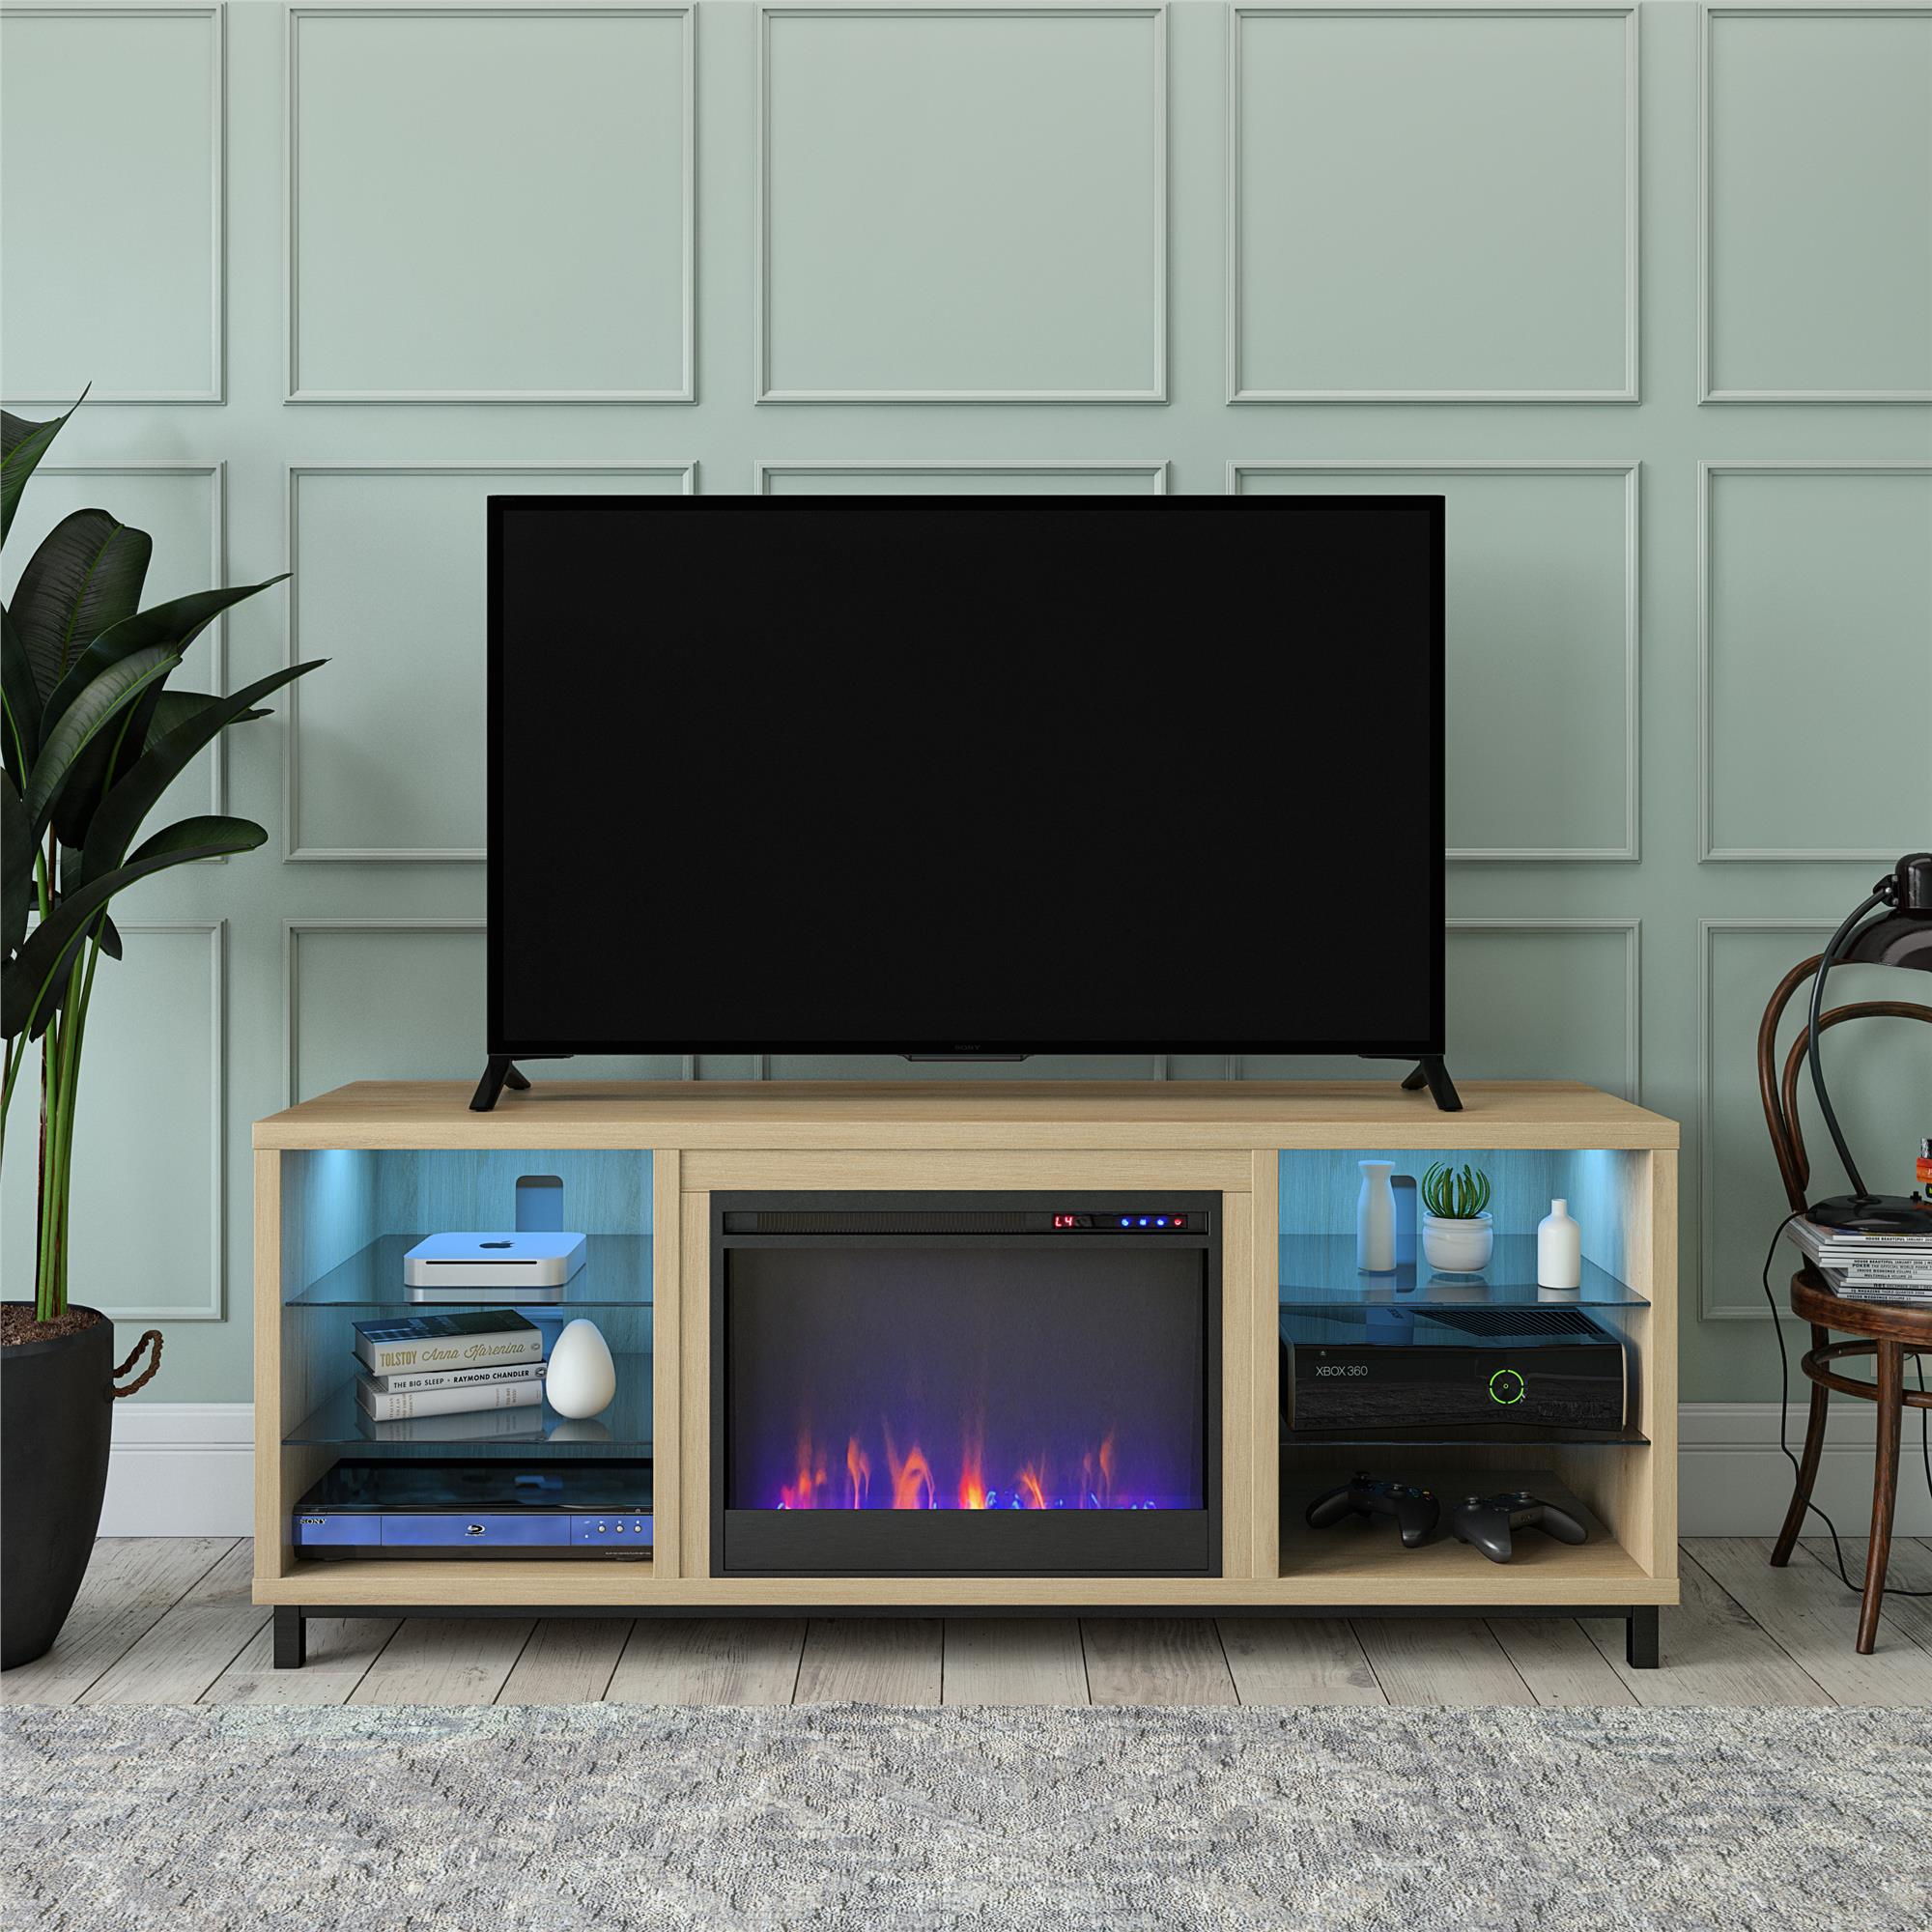 Ameriwood Home Lumina Deluxe Fireplace TV Stand for TVs up to 70", Blonde Oak - image 1 of 20